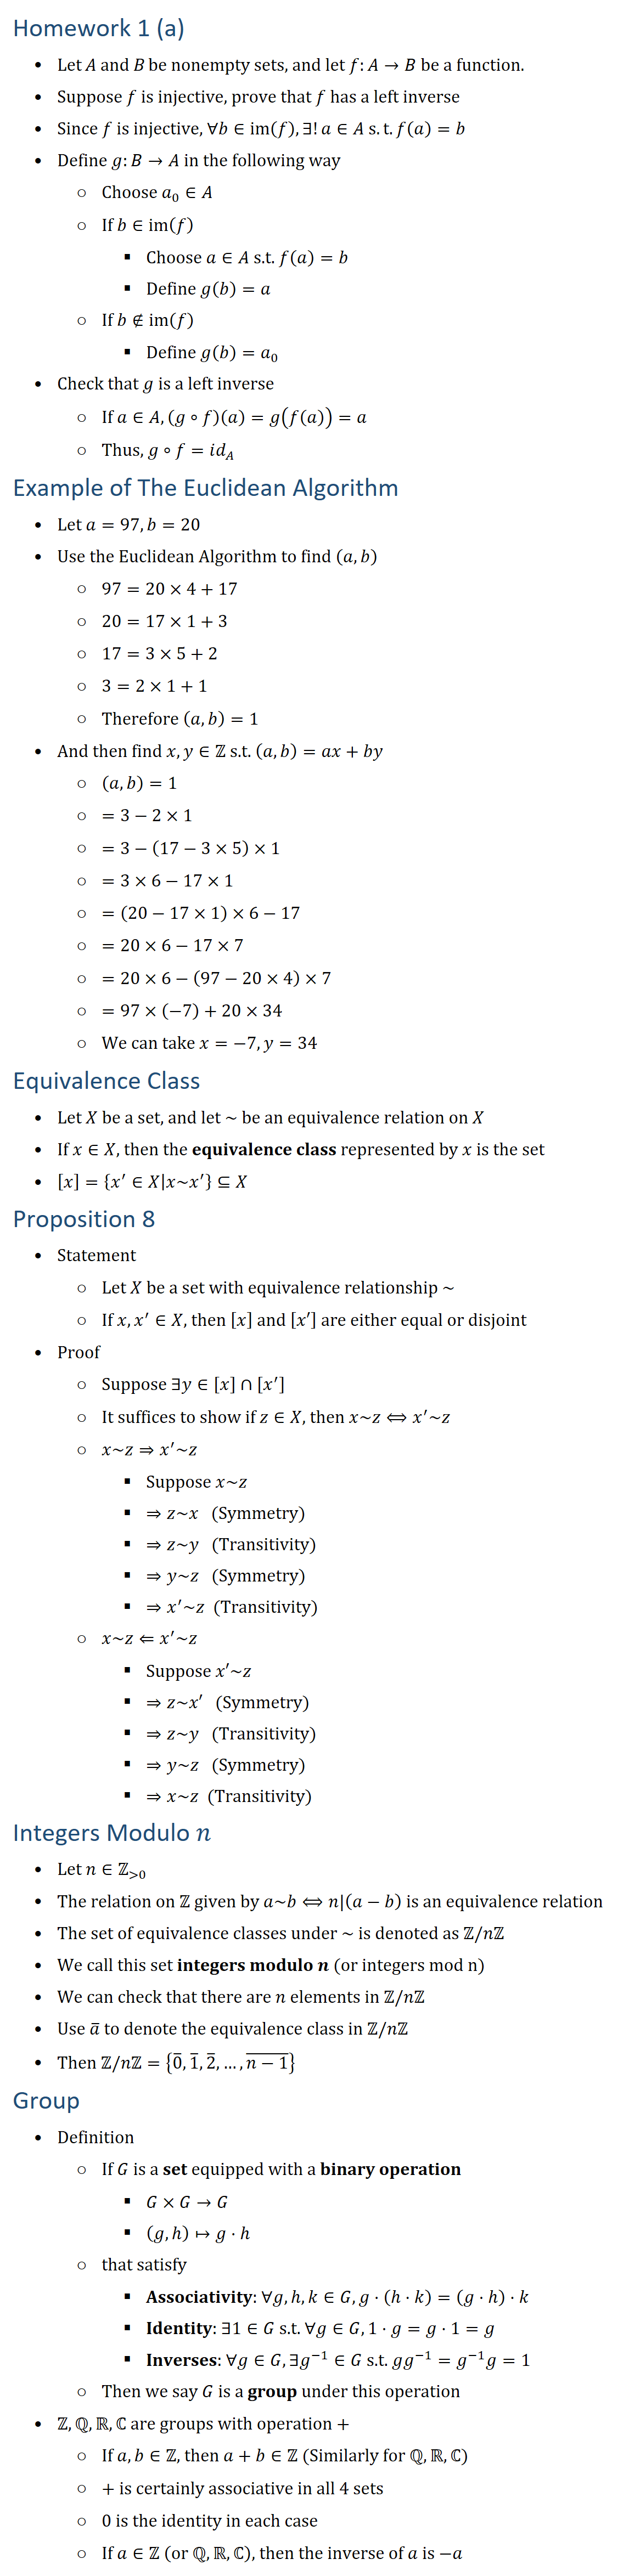 Homework 1 (a) • Let A and B be nonempty sets, and let f:A→B be a function. • Suppose f is injective, prove that f has a left inverse • Since f is injective, ∀b∈im(f),∃!a∈A s.t. f(a)=b • Define g:B→A in the following way ○ Choose a_0∈A ○ If b∈im(f) § Choose a∈A s.t. f(a)=b § Define g(b)=a ○ If b∉im(f) § Define g(b)=a_0 • Check that g is a left inverse ○ If a∈A, (g∘f)(a)=g(f(a))=a ○ Thus, g∘f=id_A Example of The Euclidean Algorithm • Let a=97, b=20 • Use the Euclidean Algorithm to find (a,b) ○ 97=20×4+17 ○ 20=17×1+3 ○ 17=3×5+2 ○ 3=2×1+1 ○ Therefore (a,b)=1 • And then find x,y∈Z s.t. (a,b)=ax+by ○ (a,b)=1 ○ =3−2×1 ○ =3−(17−3×5)×1 ○ =3×6−17×1 ○ =(20−17×1)×6−17 ○ =20×6−17×7 ○ =20×6−(97−20×4)×7 ○ =97×(−7)+20×34 ○ We can take x=−7, y=34 Equivalence Class • Let X be a set, and let ~ be an equivalence relation on X • If x∈X, then the equivalence class represented by x is the set • [x]={x^′∈X│x~x^′ }⊆X Proposition 8 • Statement ○ Let X be a set with equivalence relationship ~ ○ If x,x^′∈X, then [x] and [x′] are either equal or disjoint • Proof ○ Suppose ∃y∈[x]∩[x^′ ] ○ It suffices to show if z∈X, then x~z⟺x^′~z ○ x~z⇒x^′~z § Suppose x~z § ⇒z~x (Symmetry) § ⇒z~y (Transitivity) § ⇒y~z (Symmetry) § ⇒x^′~z (Transitivity) ○ x~z⇐x^′~z § Suppose x′~z § ⇒z~x′ (Symmetry) § ⇒z~y (Transitivity) § ⇒y~z (Symmetry) § ⇒x~z (Transitivity) Integers Modulo n • Let n∈Z( 0) • The relation on Z given by a~b⟺n|(a−b) is an equivalence relation • The set of equivalence classes under ~ is denoted as Z\/nZ • We call this set integers modulo n (or integers mod n) • We can check that there are n elements in Z\/nZ • Use a ̅ to denote the equivalence class in Z\/nZ • Then Z\/nZ={0 ̅,1 ̅,2 ̅,…,(n−1) ̅ } Group • Definition ○ If G is a set equipped with a binary operation § G×G→G § (g,h↦g⋅h ○ that satisfy § Associativity: ∀g,h,k∈G, g⋅(hk)=(g⋅h⋅k § Identity: ∃1∈G s.t. ∀g∈G,1⋅g=g⋅1=g § Inverses: ∀g∈G, ∃g^(−1)∈G s.t. gg^(−1)=g^(−1) g=1 ○ Then we say G is a group under this operation • Z,Q,R,ℂ are groups with operation + ○ If a,b∈Z, then a+b∈Z (Similarly for Q,R,ℂ) ○ + is certainly associative in all 4 sets ○ 0 is the identity in each case ○ If a∈Z (or QRℂ), then the inverse of a is −a